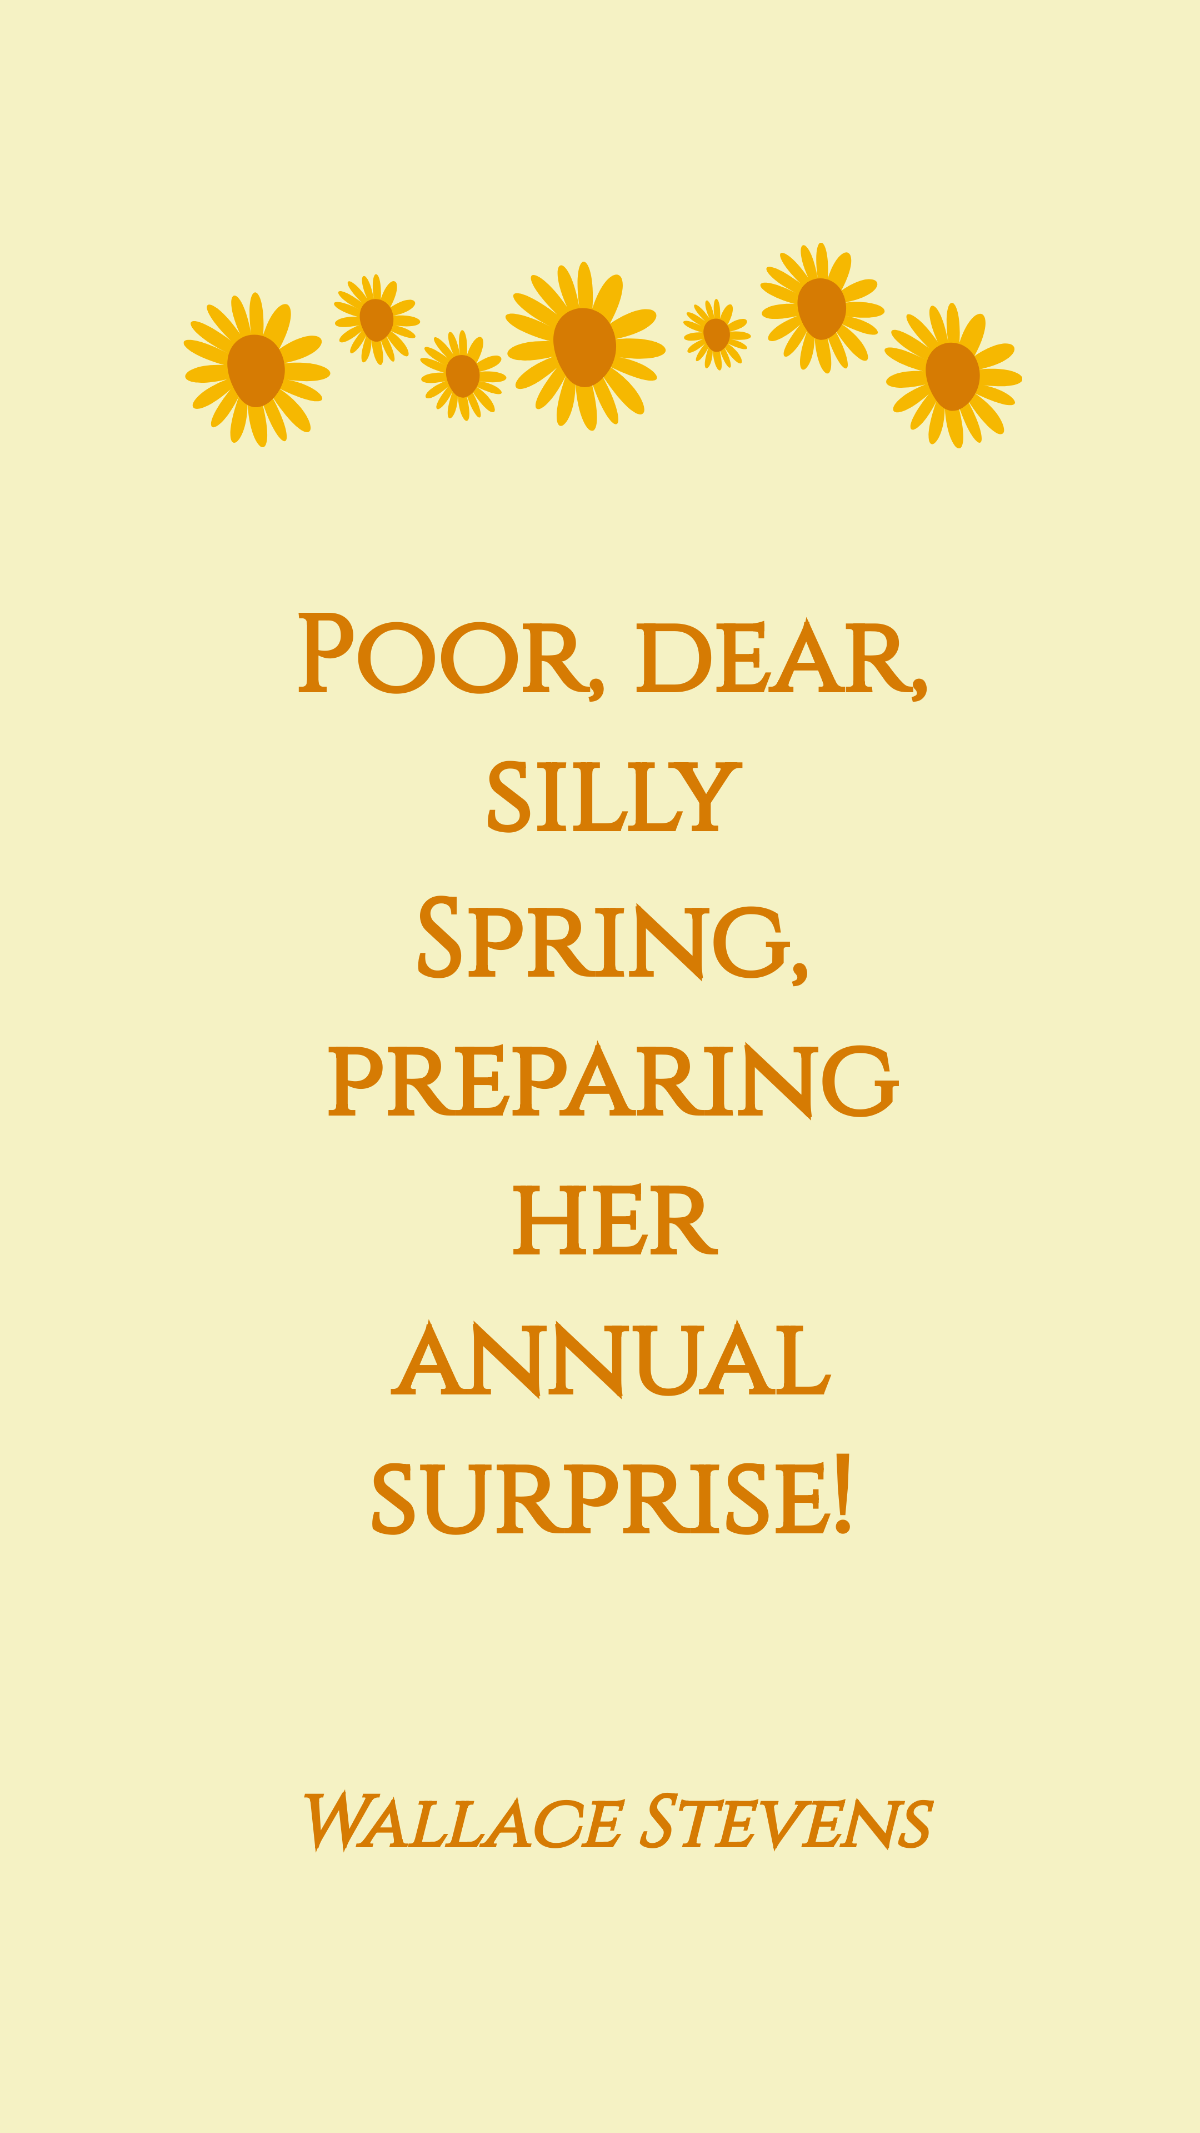 Wallace Stevens - Poor, dear, silly Spring, preparing her annual surprise!